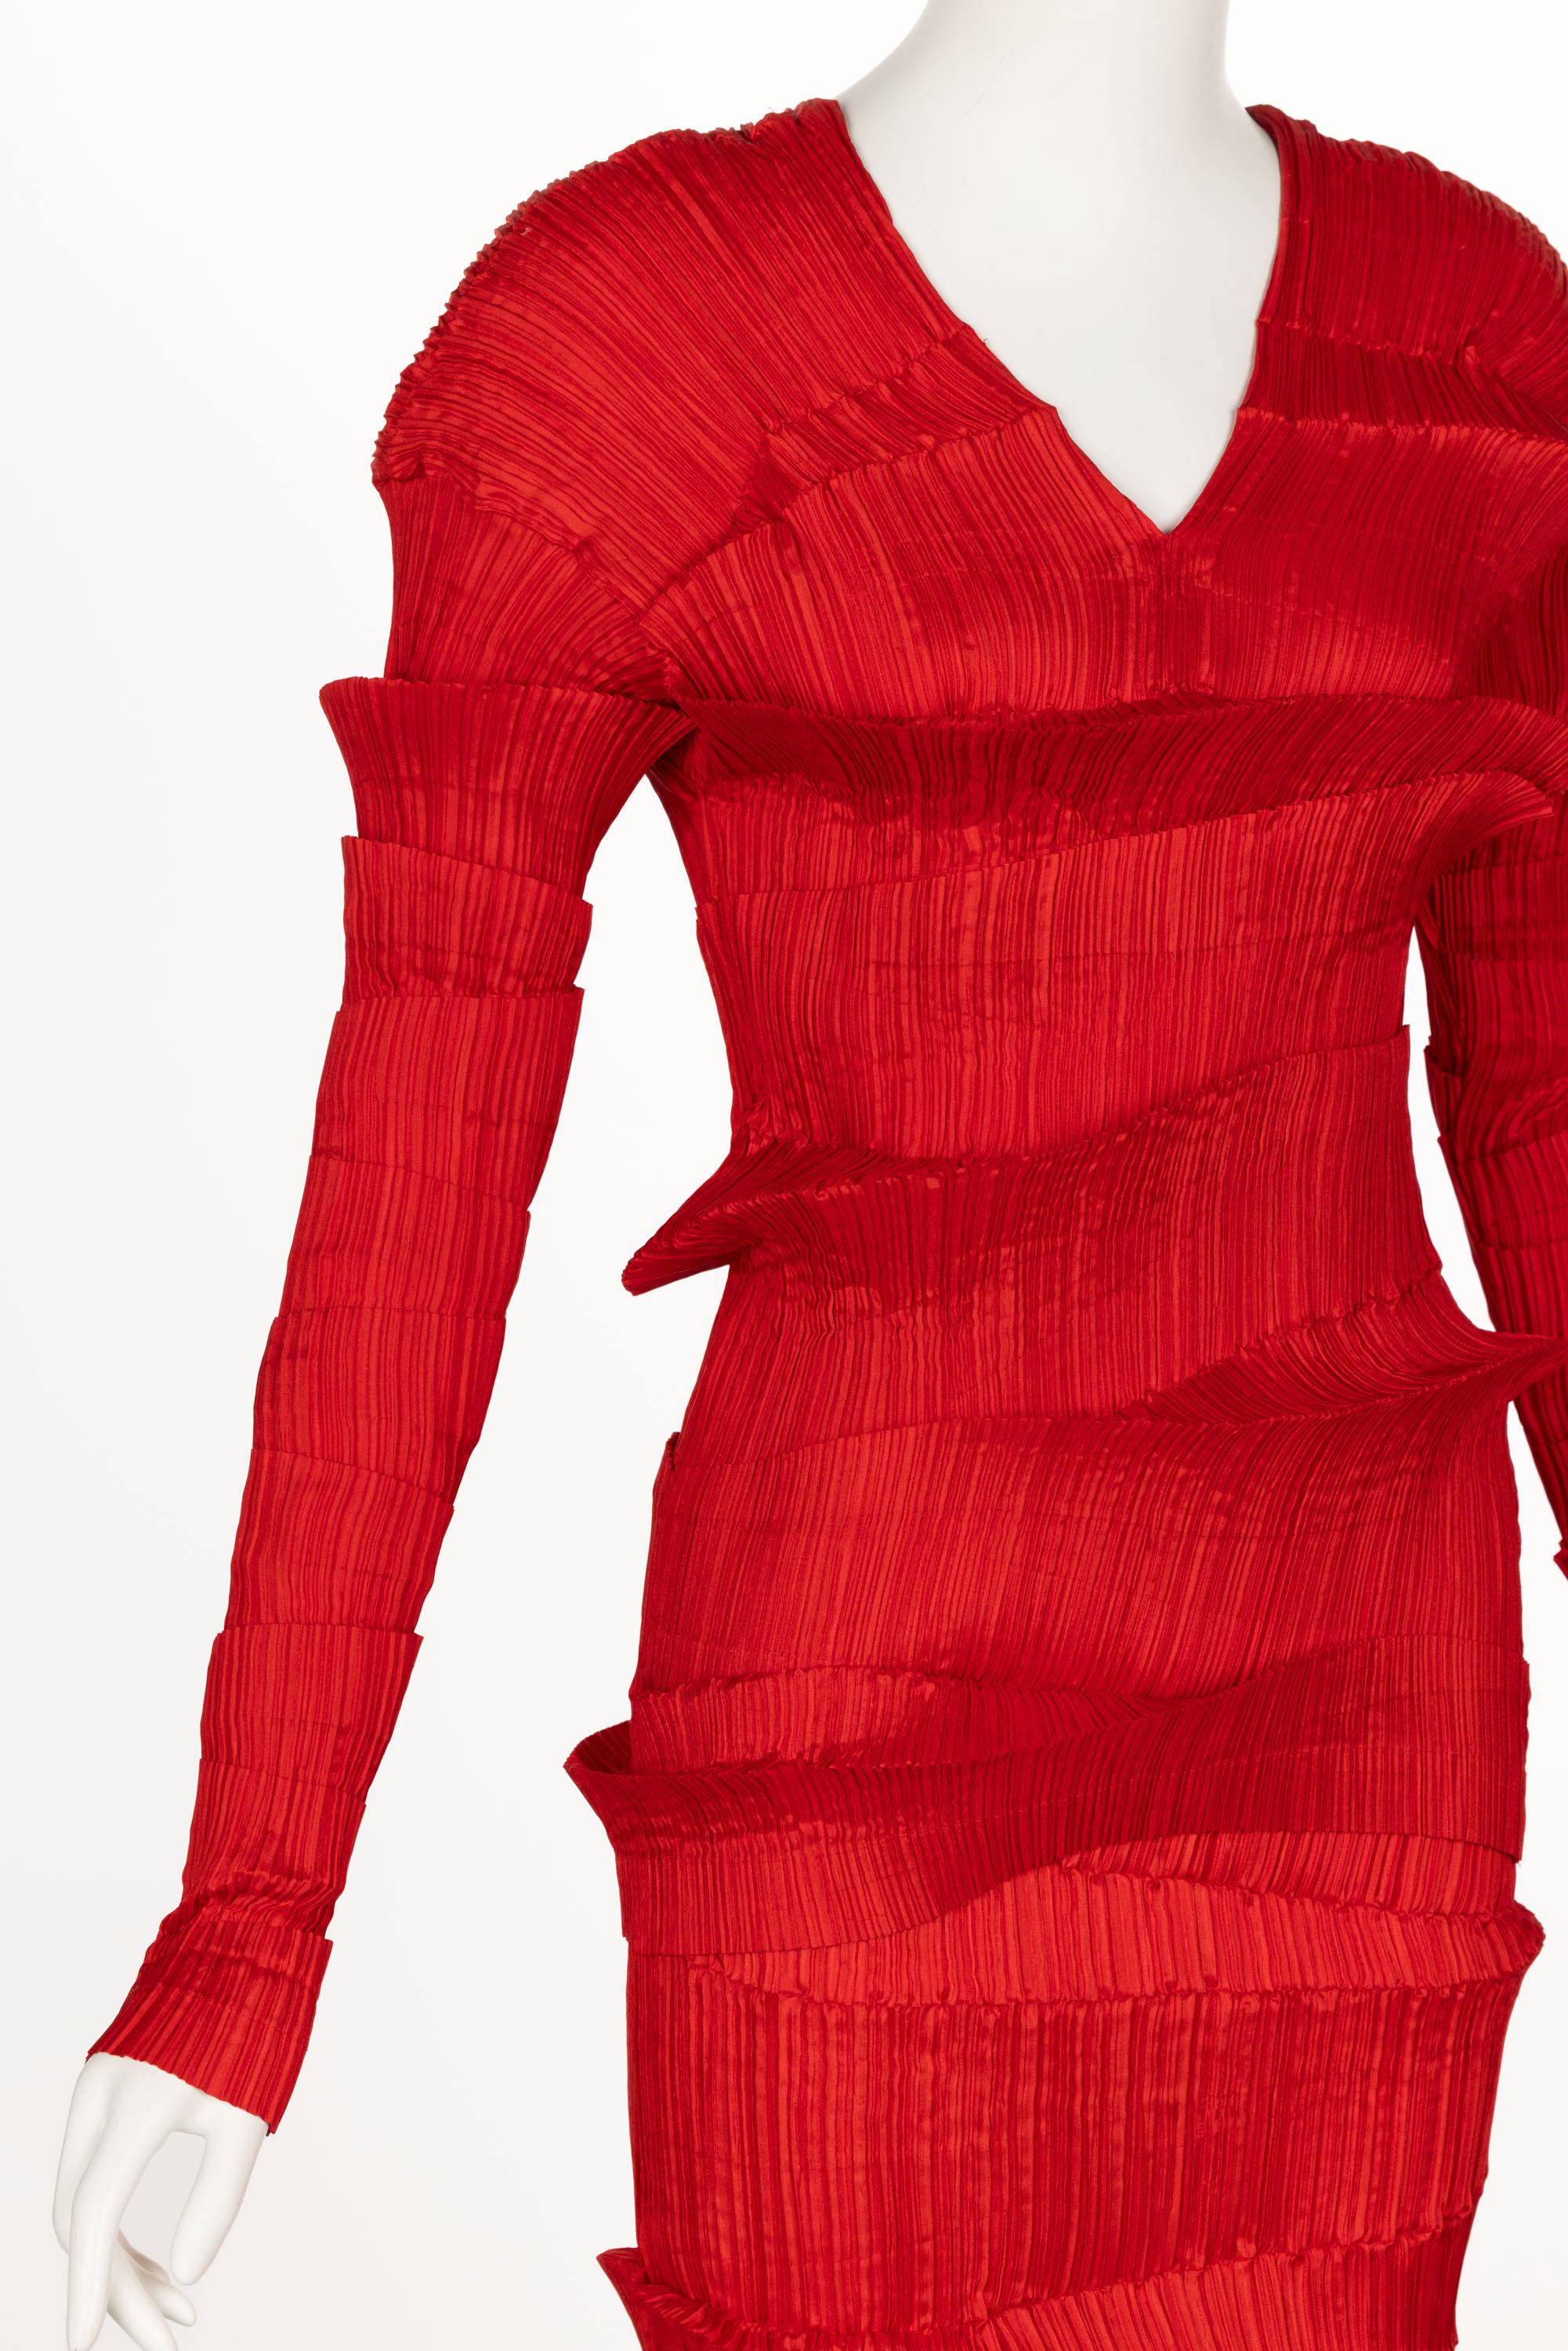 Incredible 1990s Issey Miyake Pleated Red Top & Skirt Ensemble For Sale 6